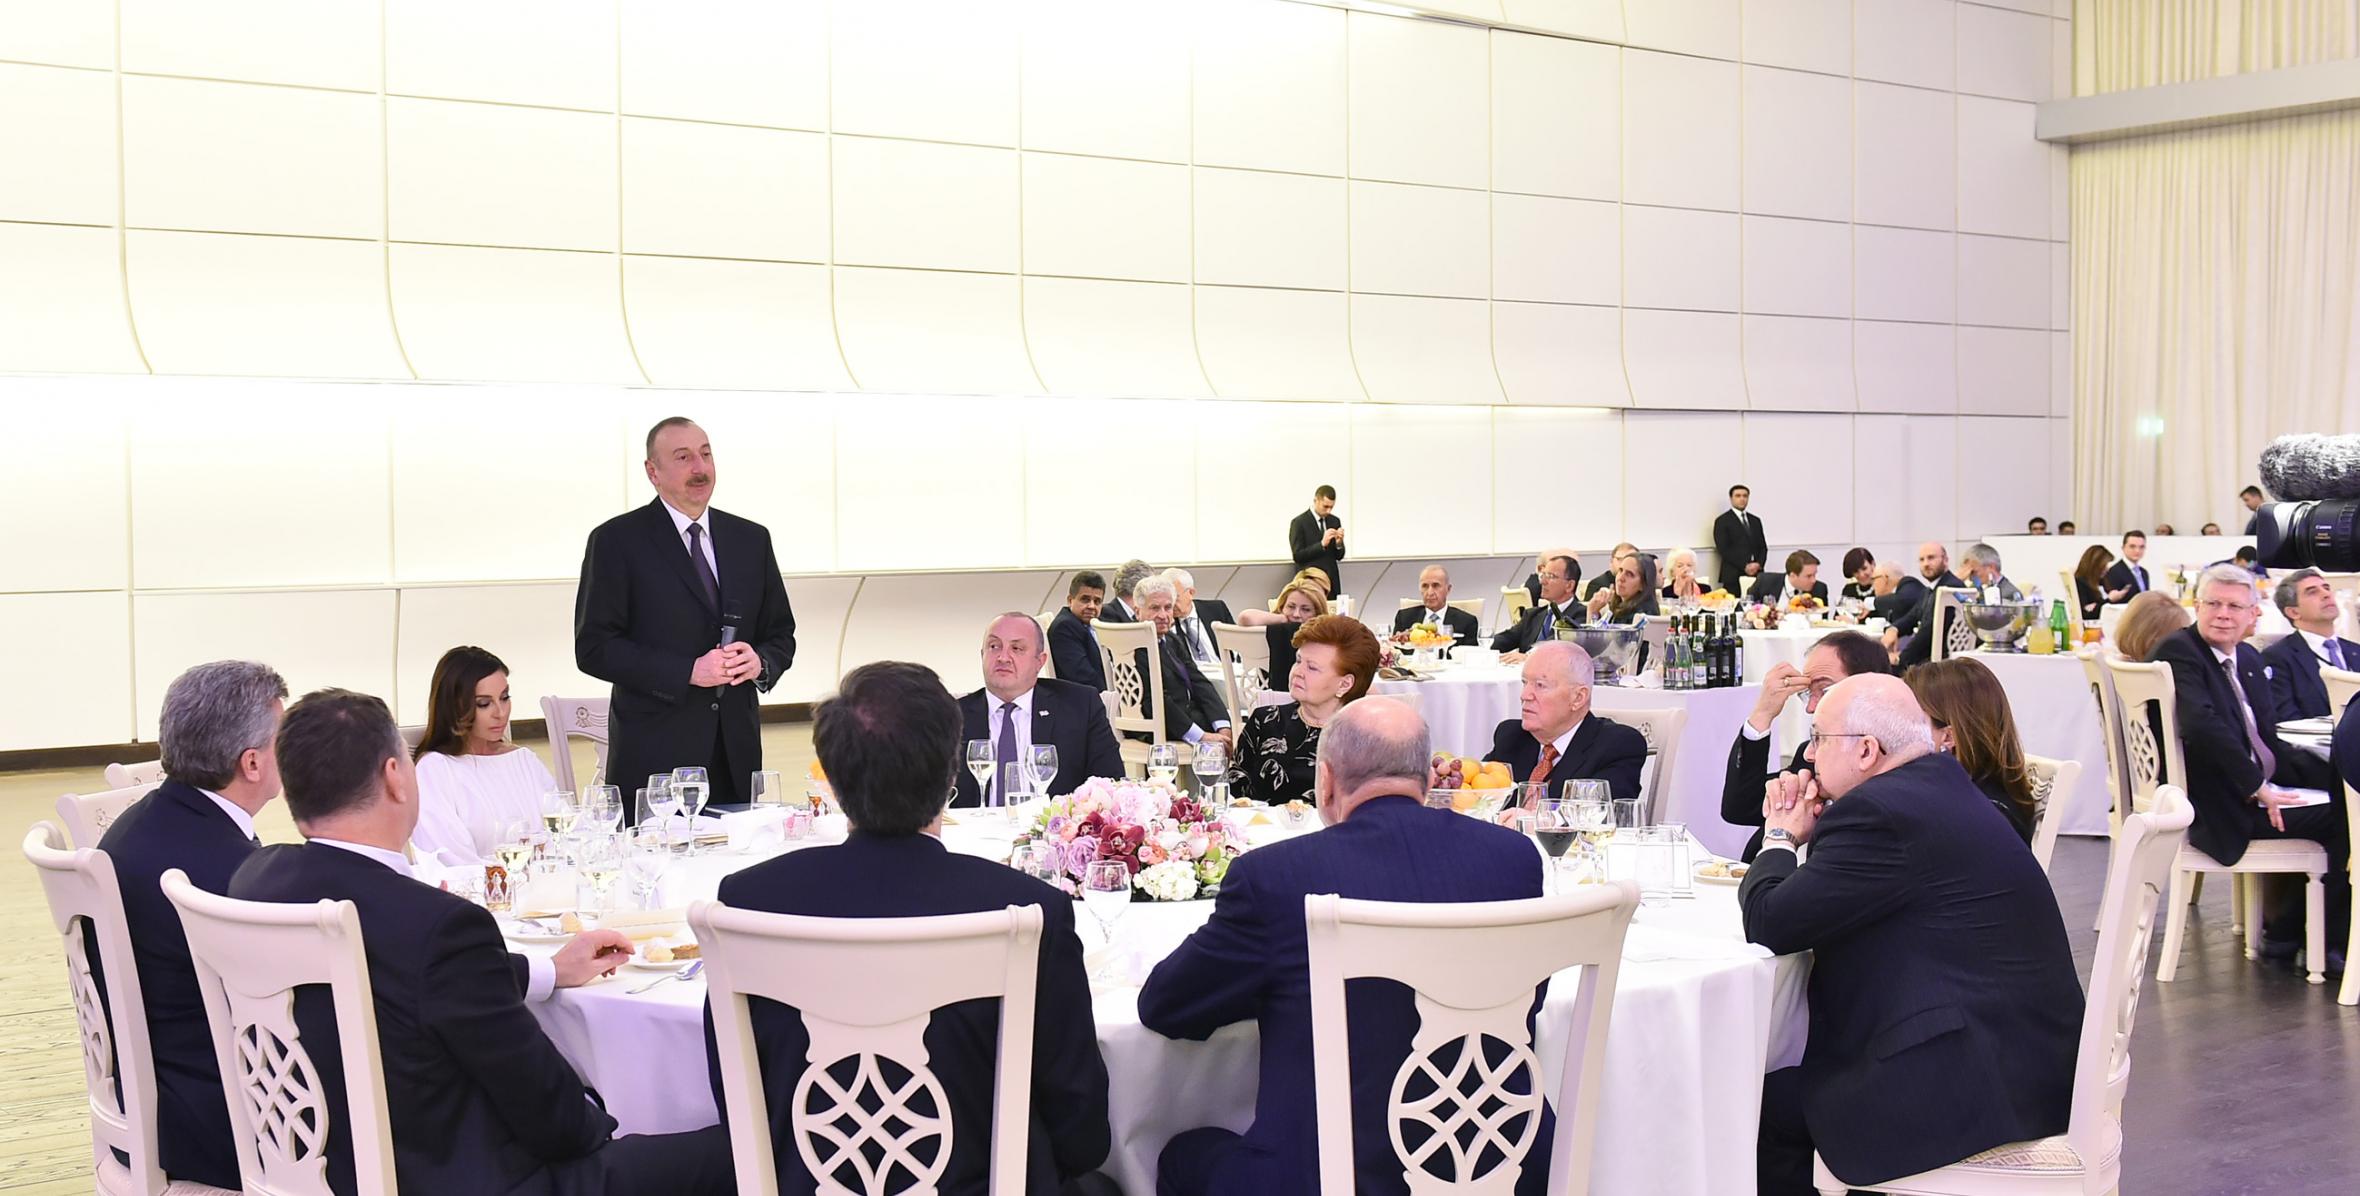 Ilham Aliyev hosted dinner reception in honor of participants of the 5th Global Baku Forum